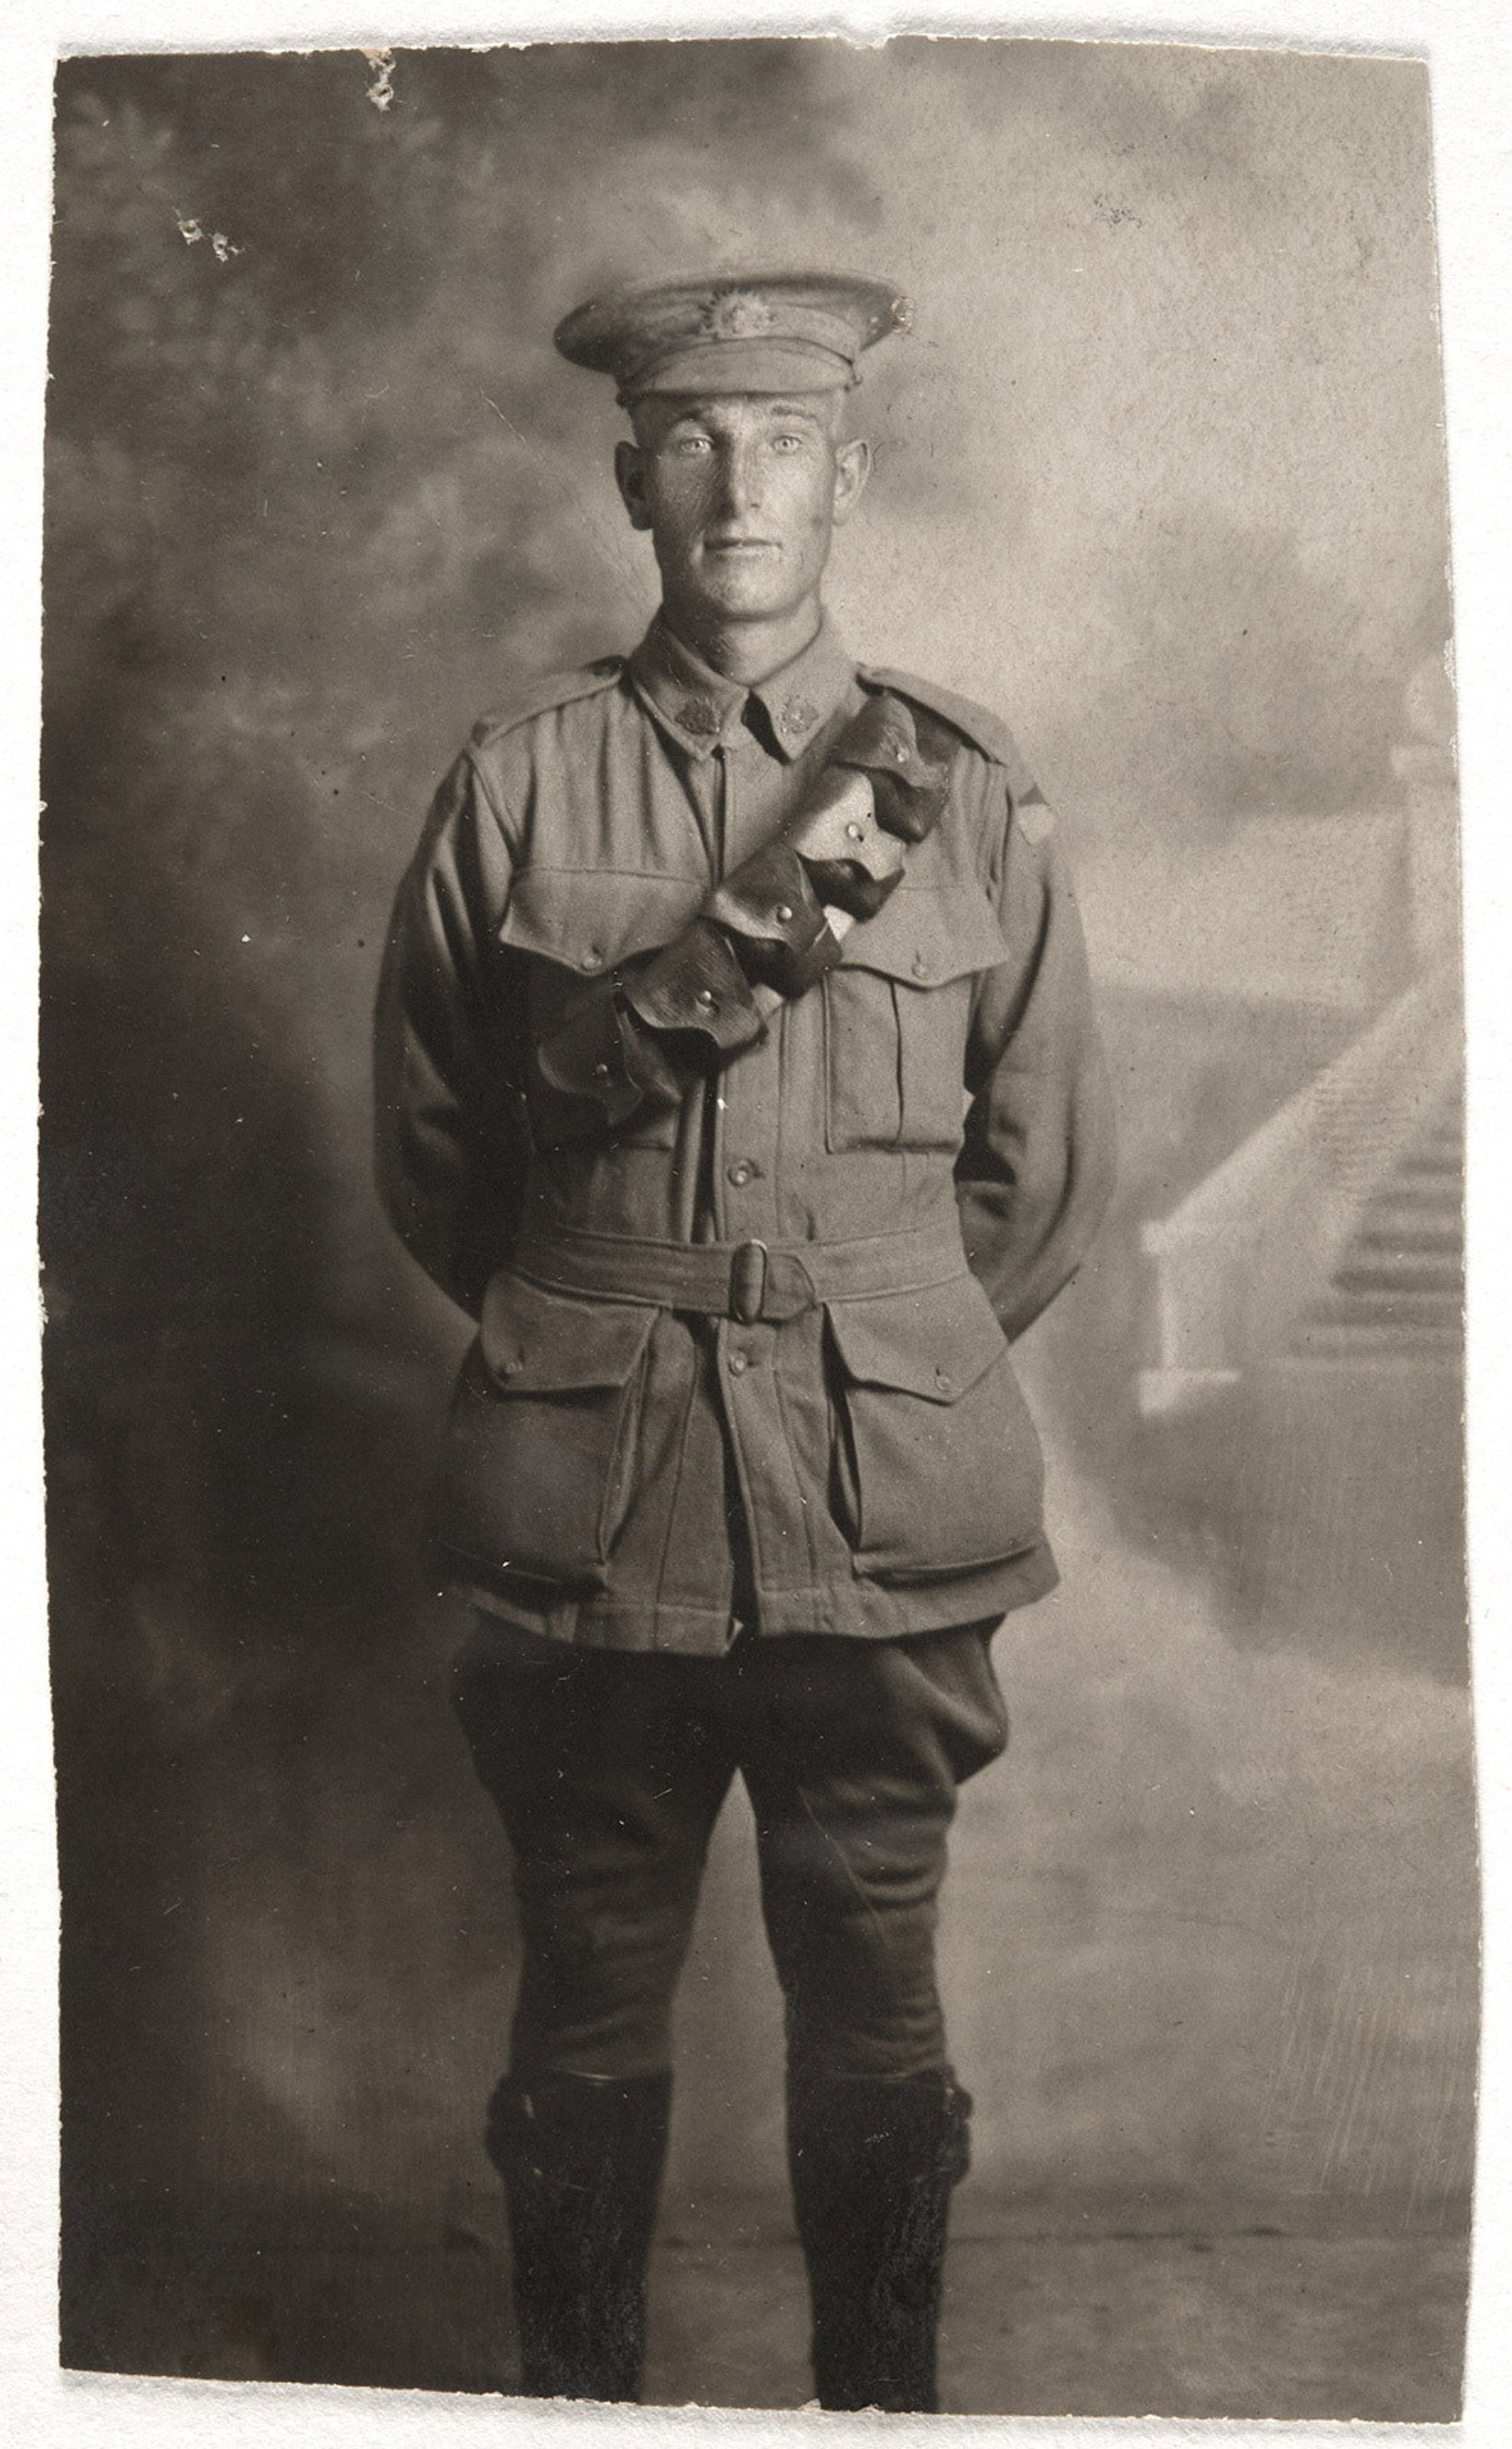 Black and white postcard of young man in uniform